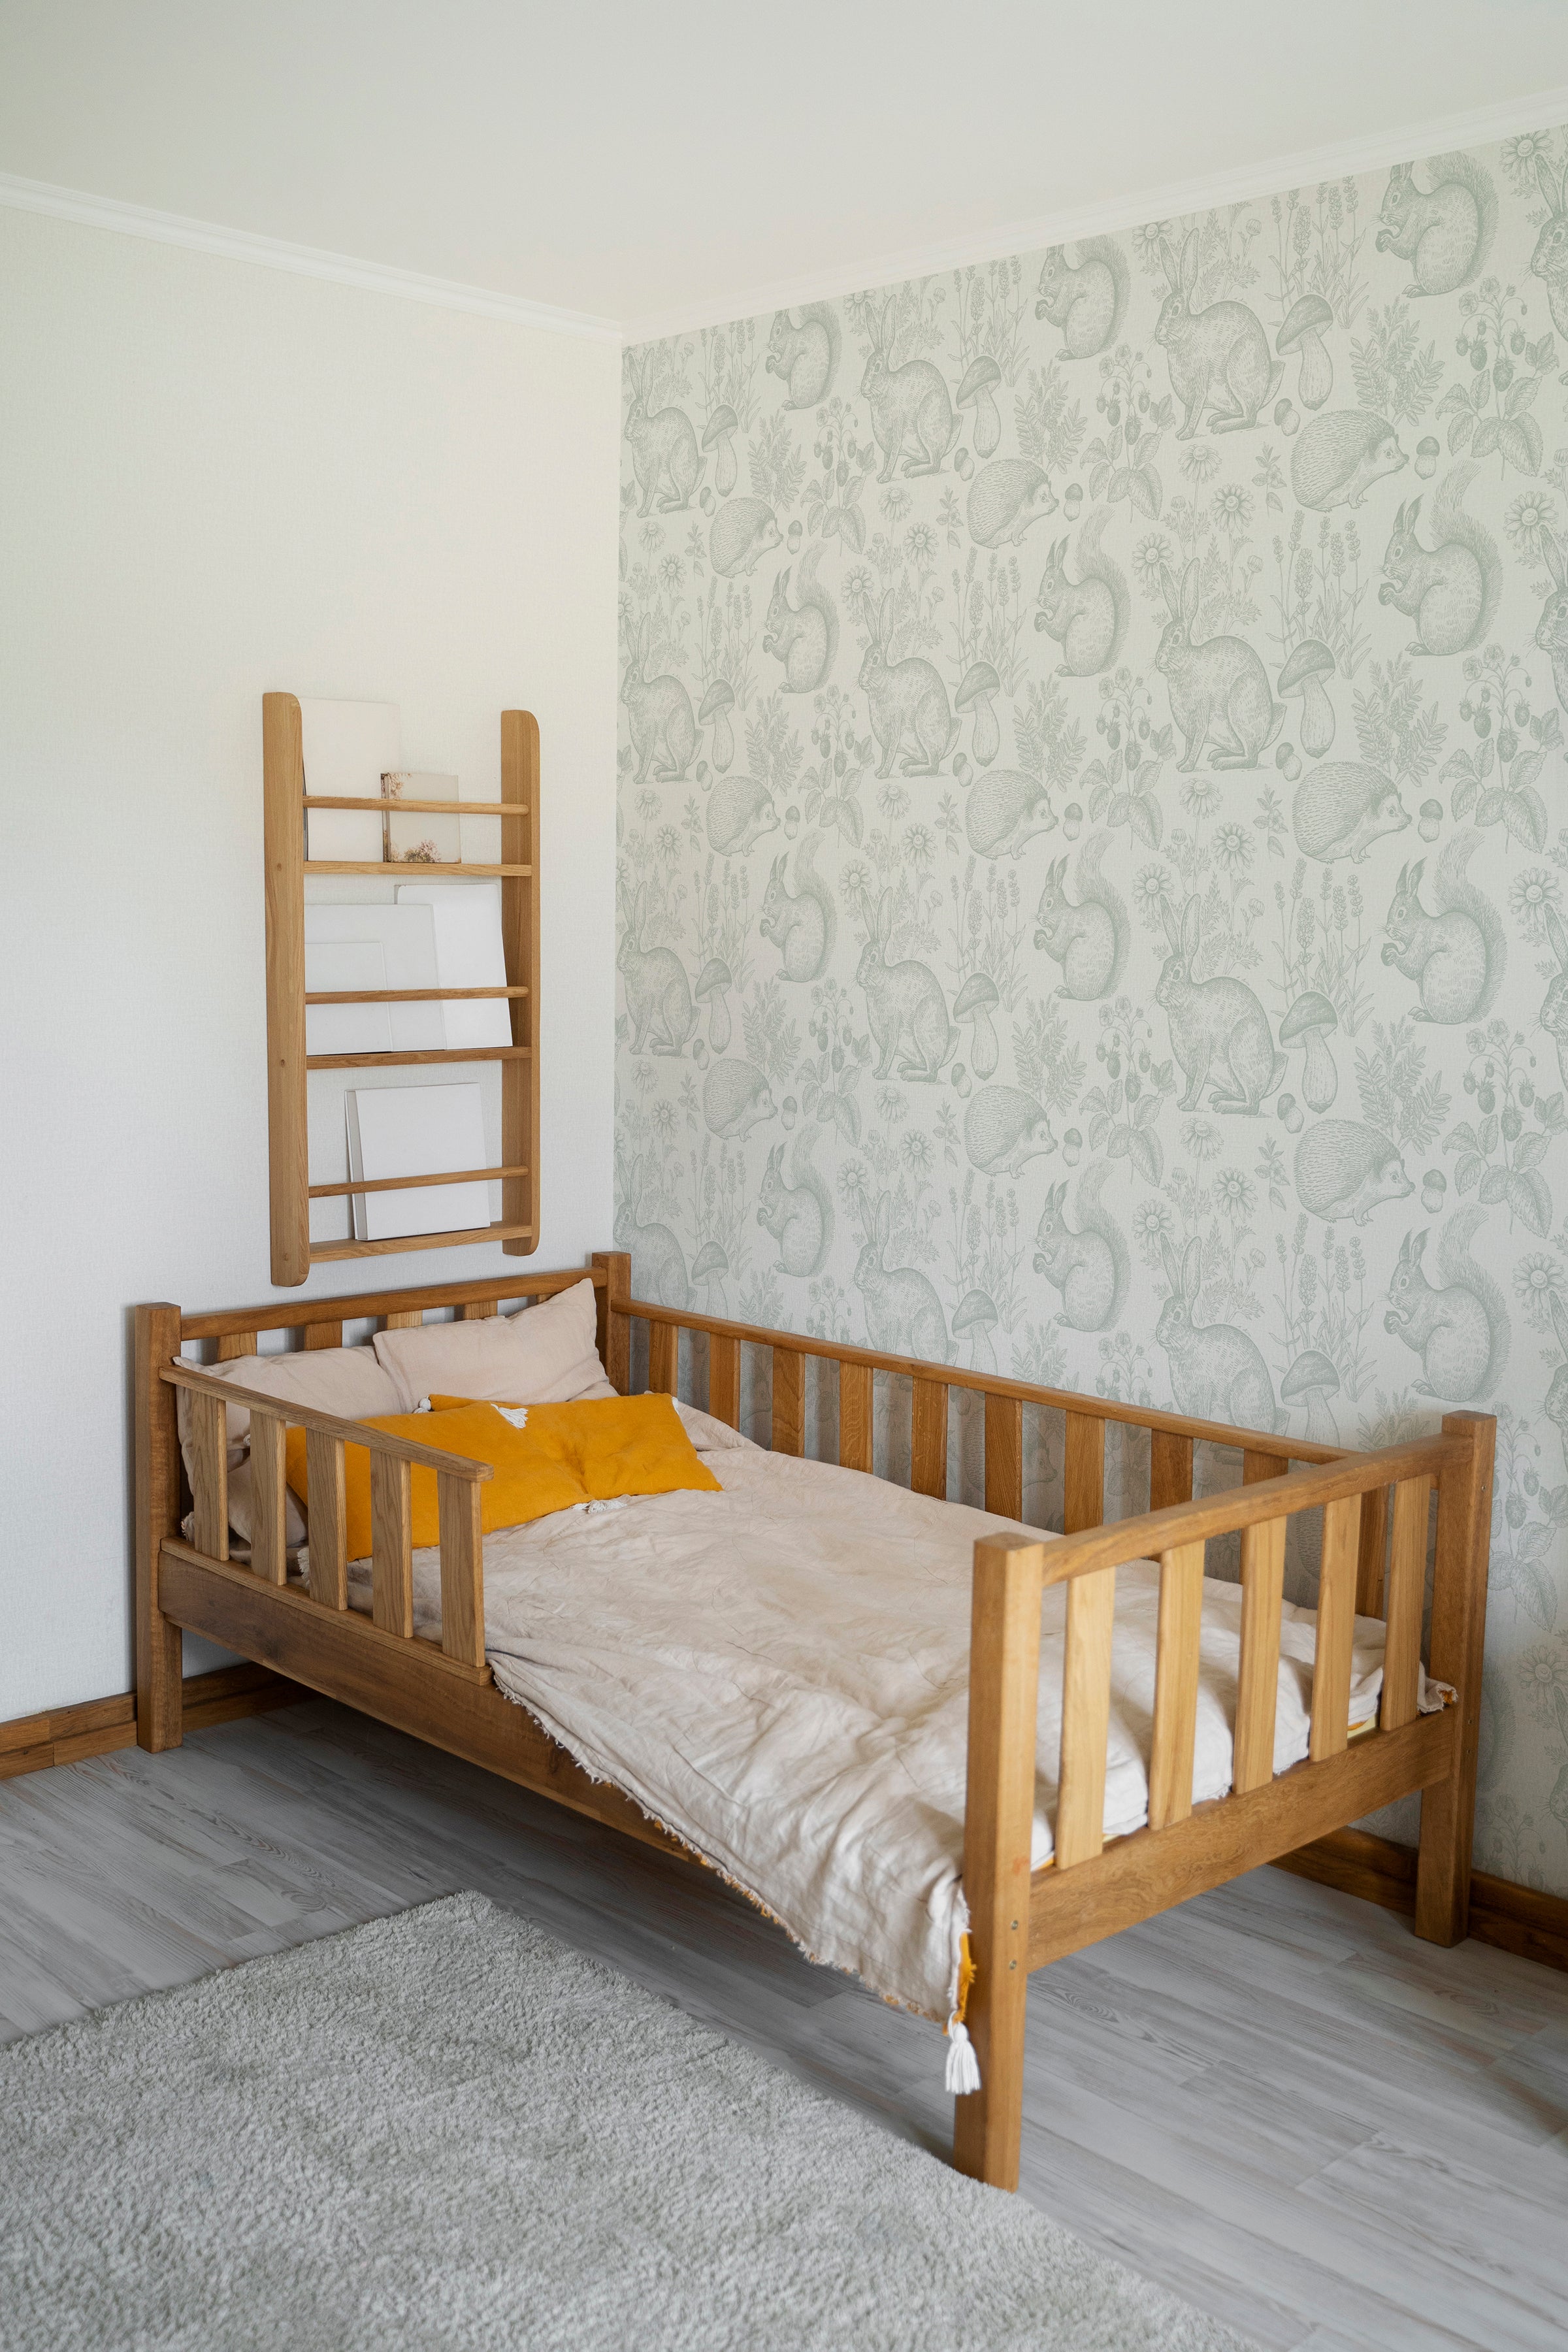 A child's bedroom features the Woodland Creatures Wallpaper - Light Sage, with illustrations of rabbits, hedgehogs, squirrels, and floral elements creating a peaceful, nature-inspired wall. A wooden bed and ladder shelf complement the gentle sage color of the wallpaper.